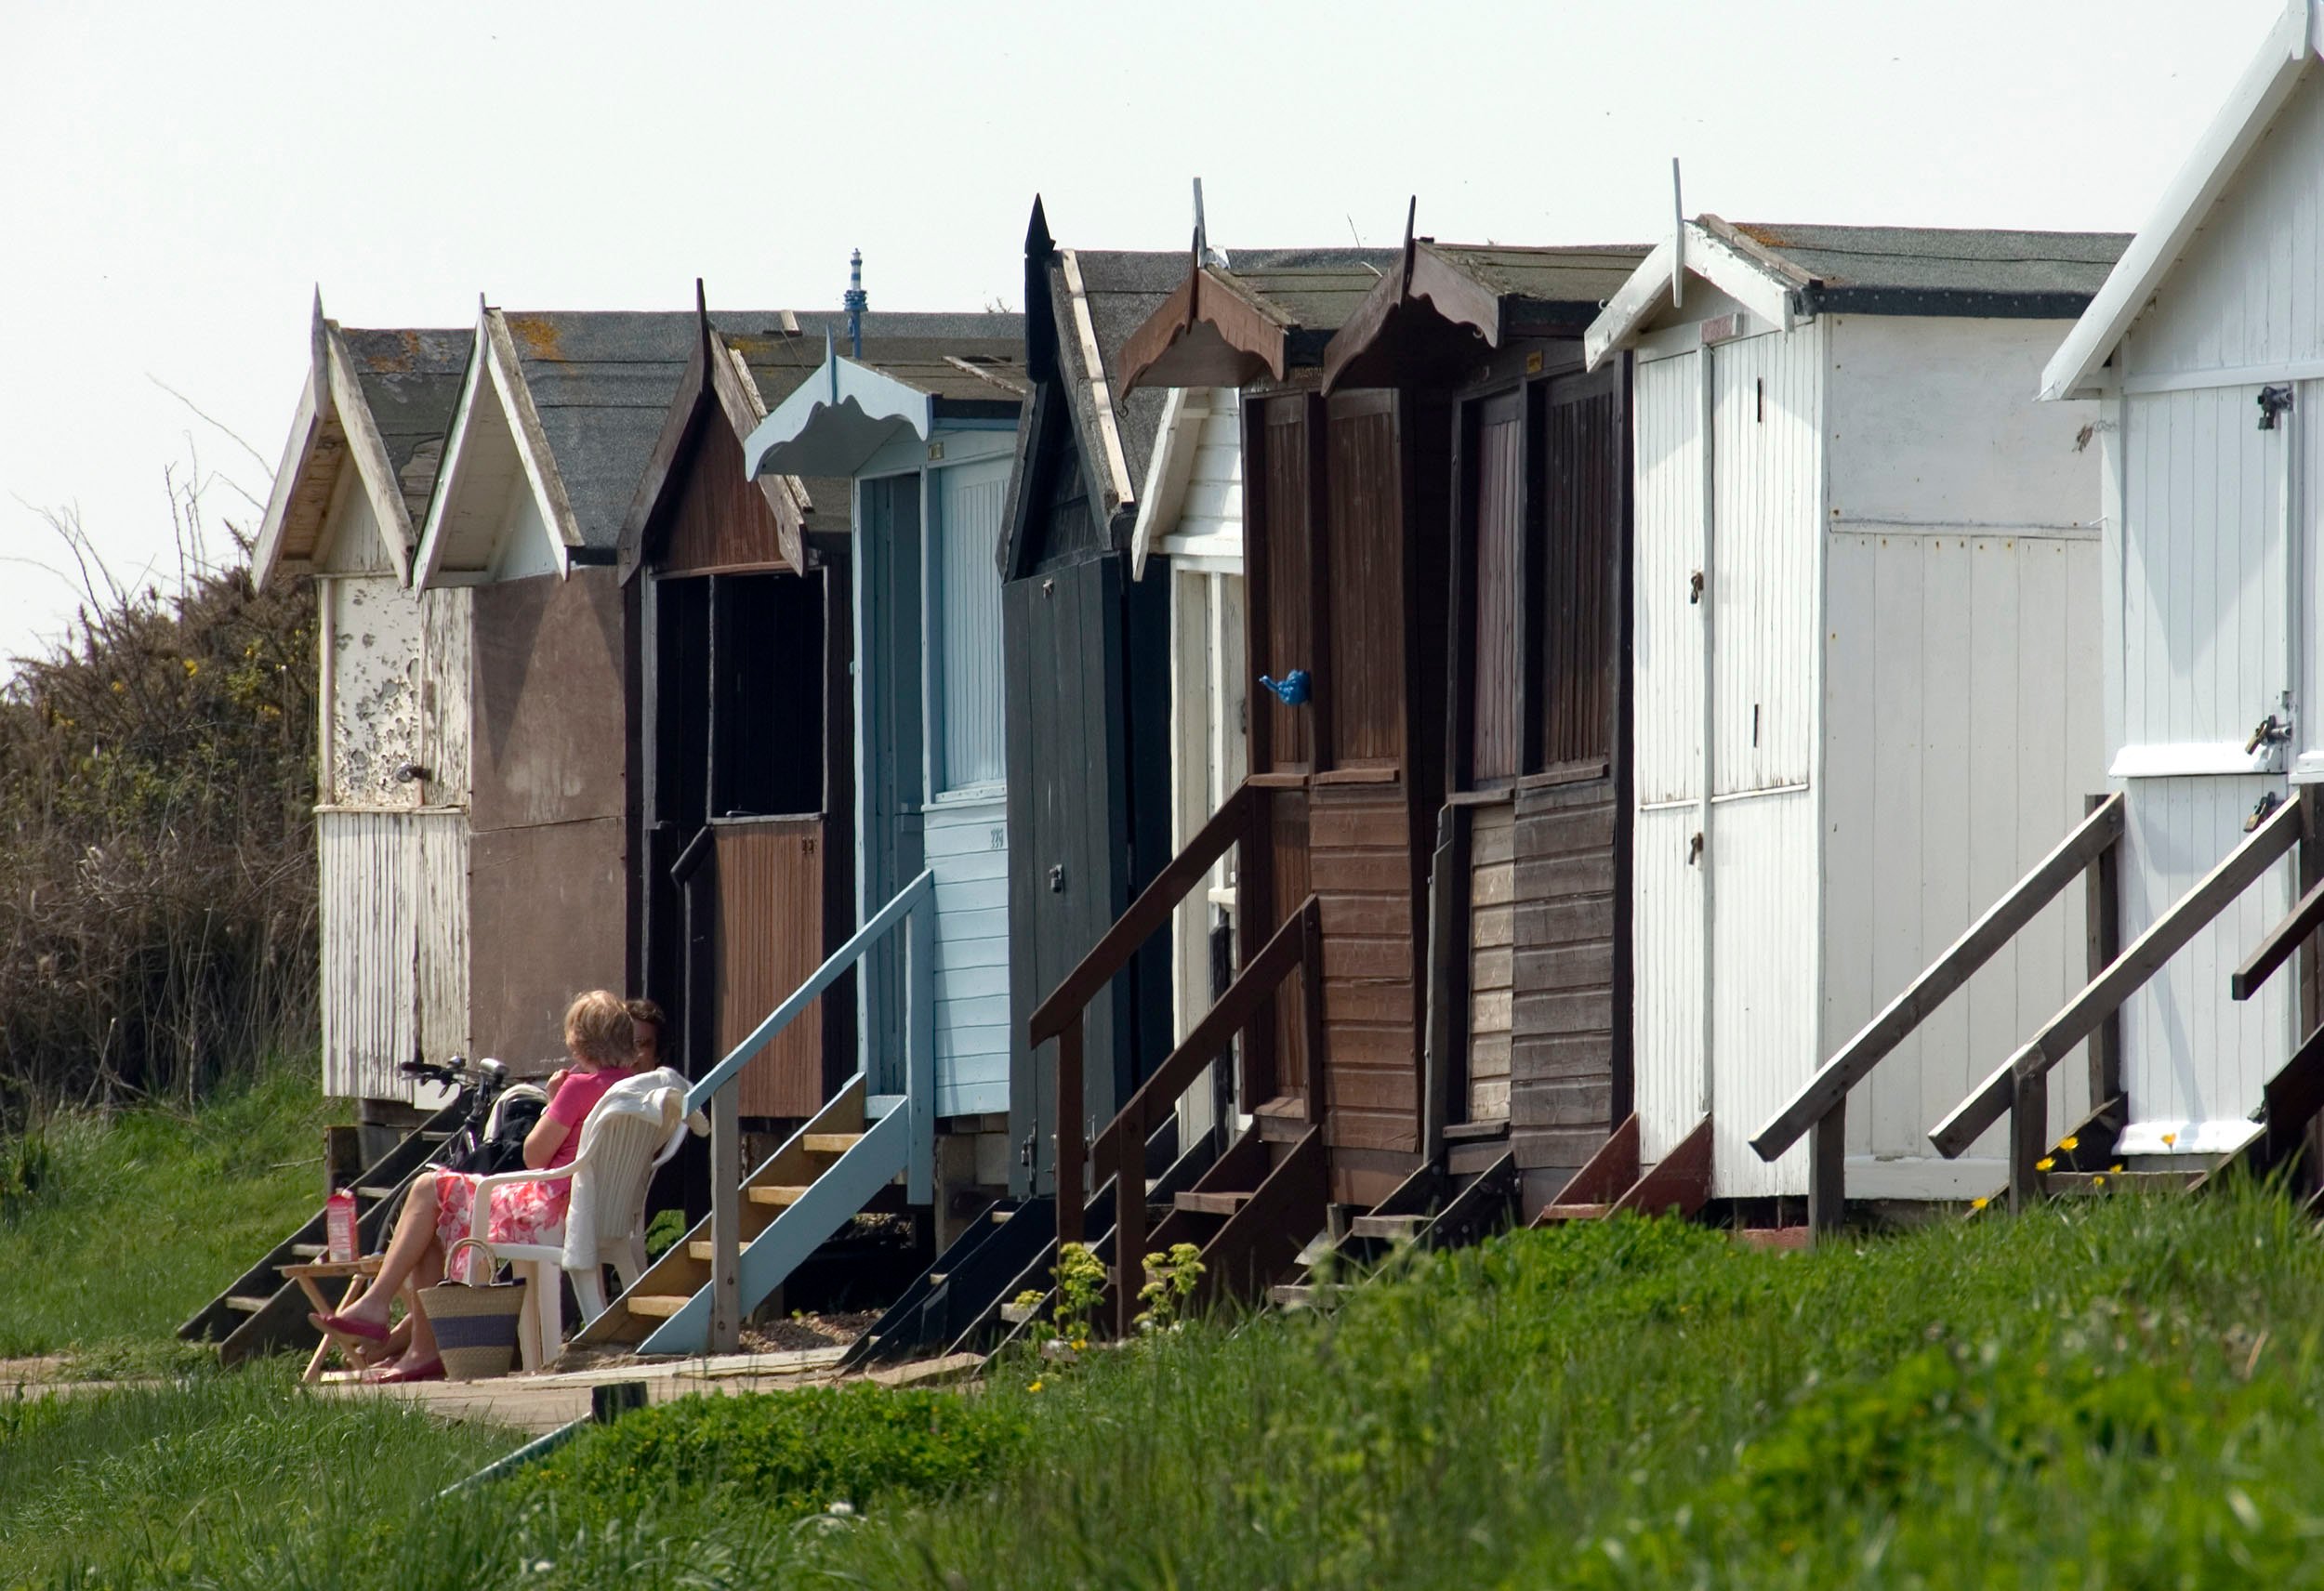 Image of colourful beach huts in Frinton-on-Sea.